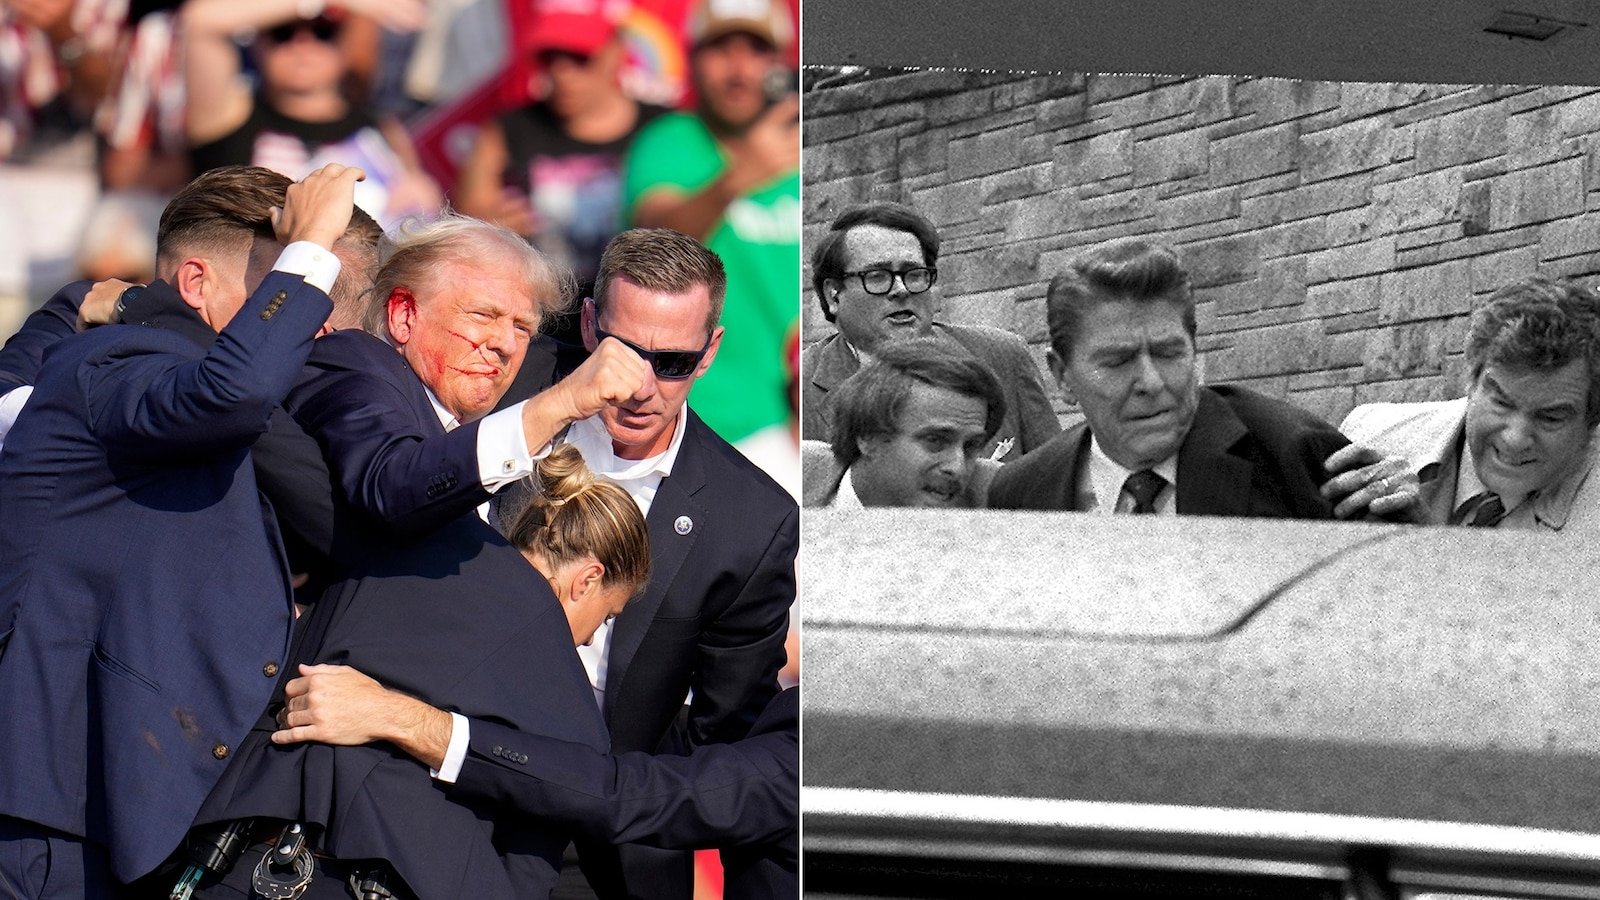 How Trump's assassination attempt compares to the attempt on Ronald Reagan in 1981